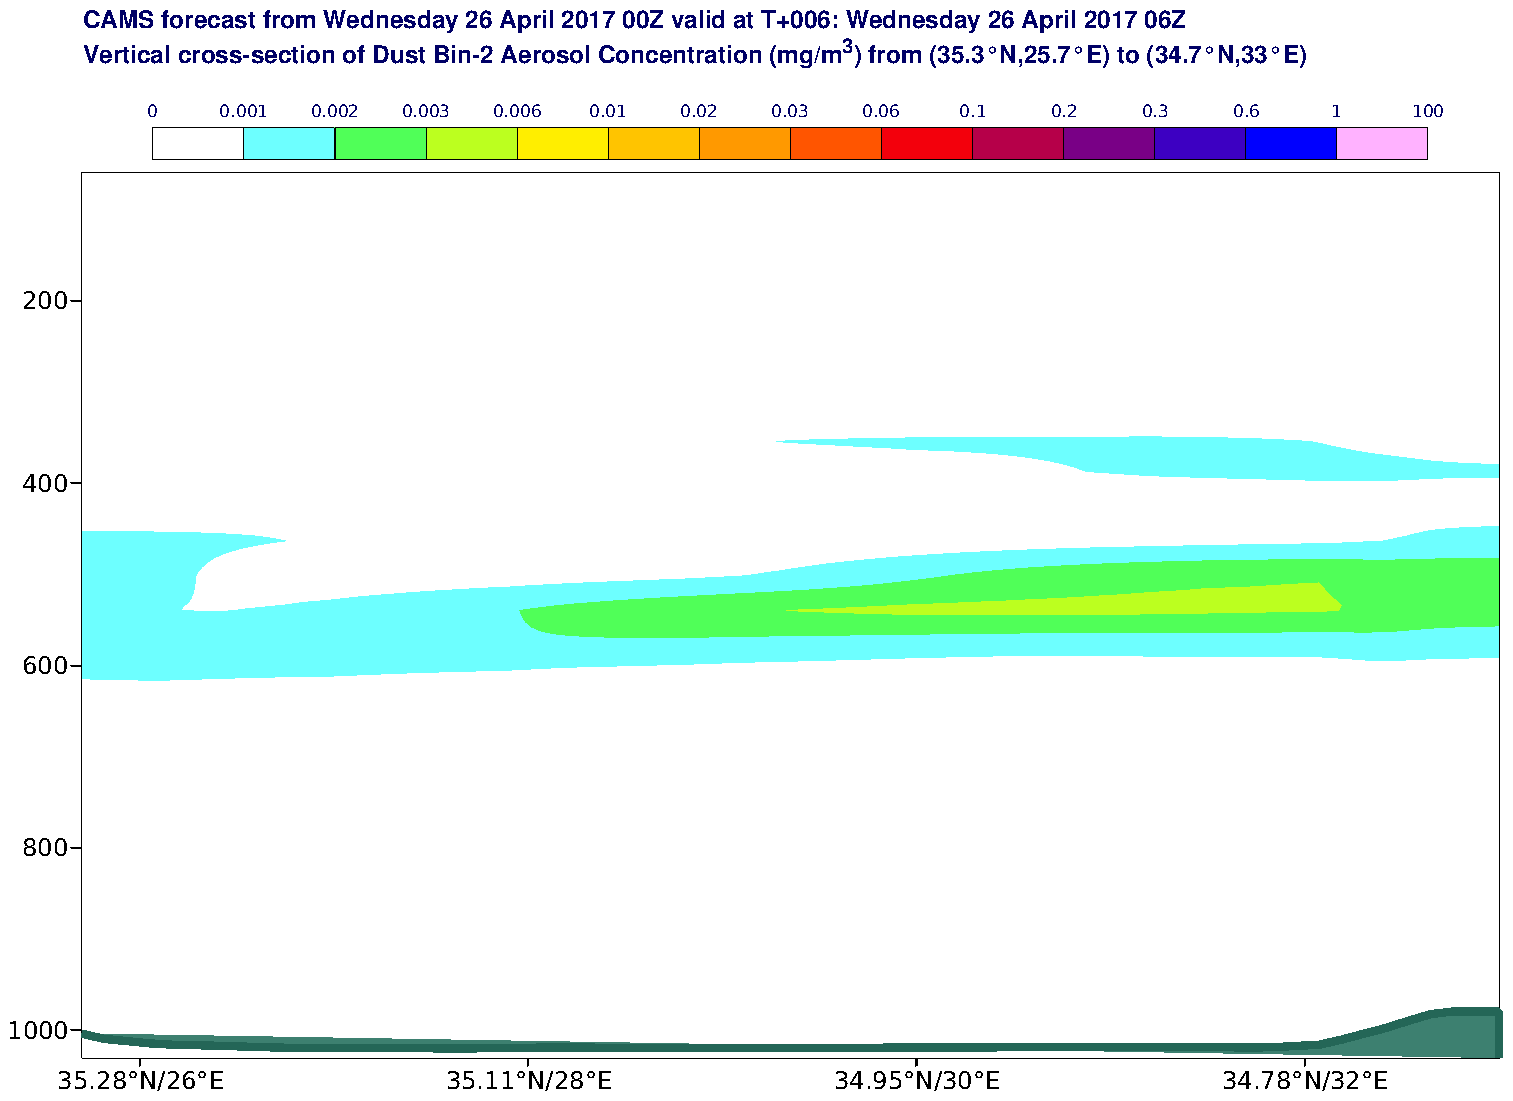 Vertical cross-section of Dust Bin-2 Aerosol Concentration (mg/m3) valid at T6 - 2017-04-26 06:00